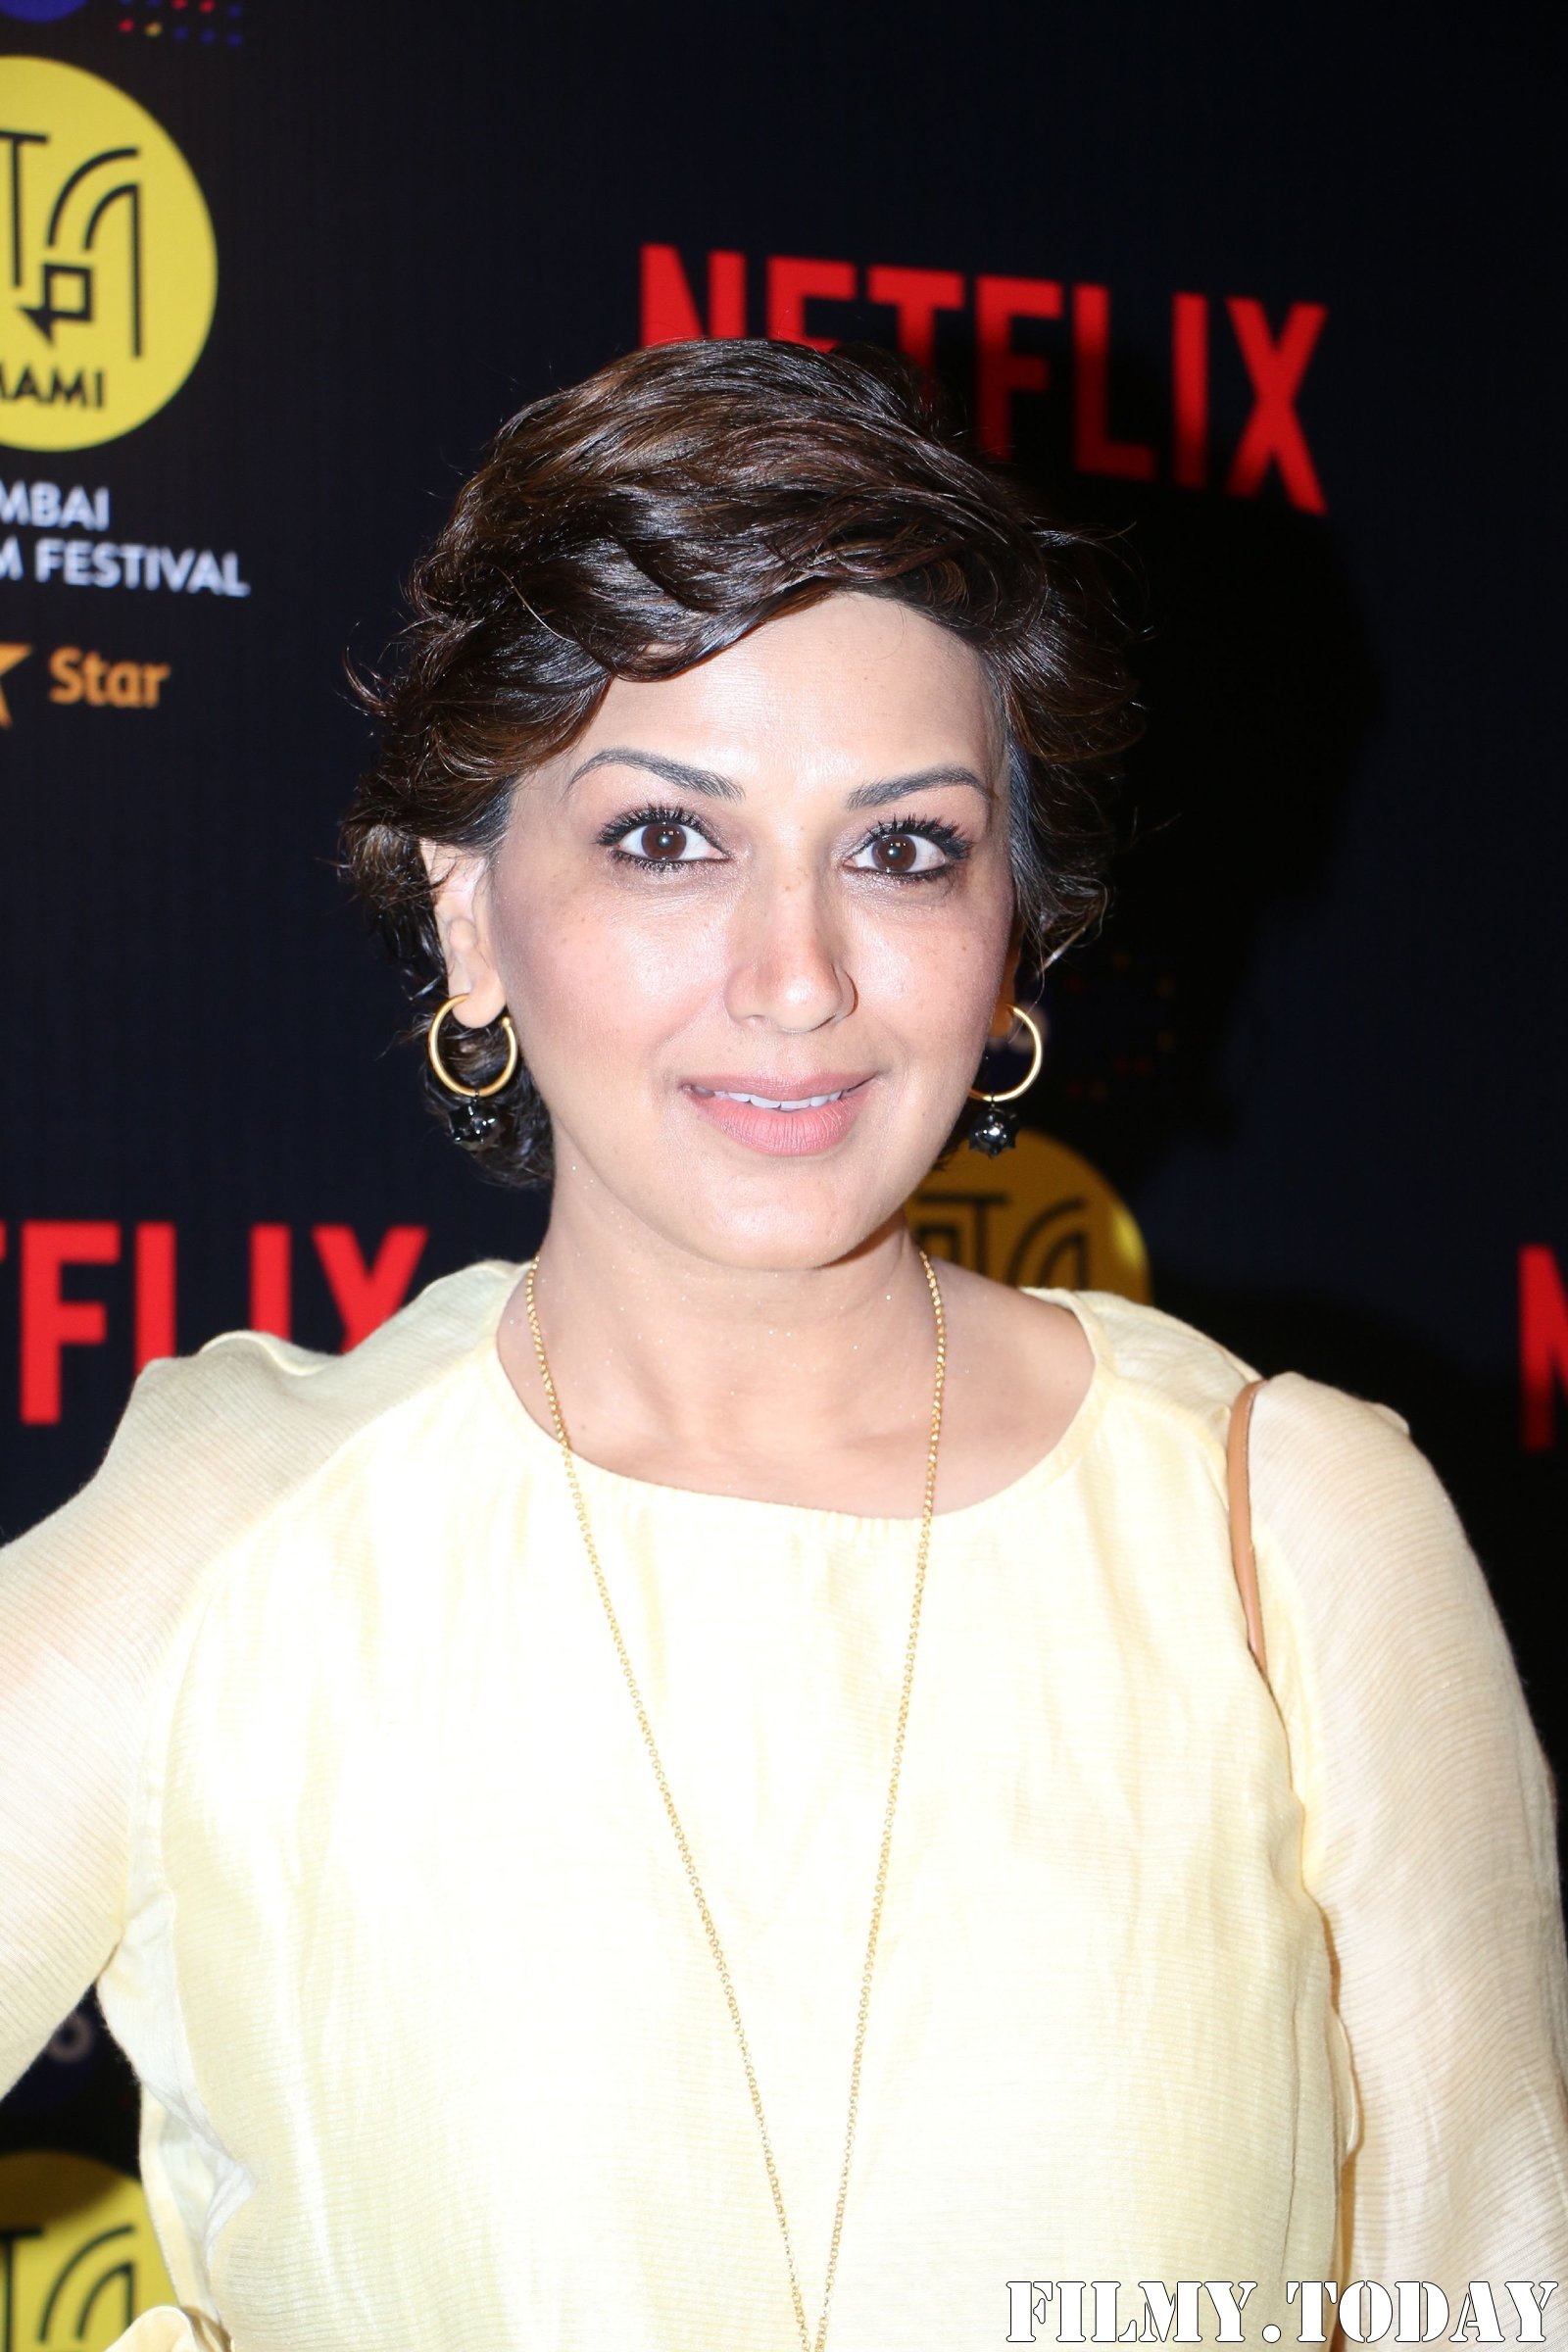 Sonali Bendre - Photos: Women In Films Celebrations By Netflix At Mami Film Festival 2019 | Picture 1693375